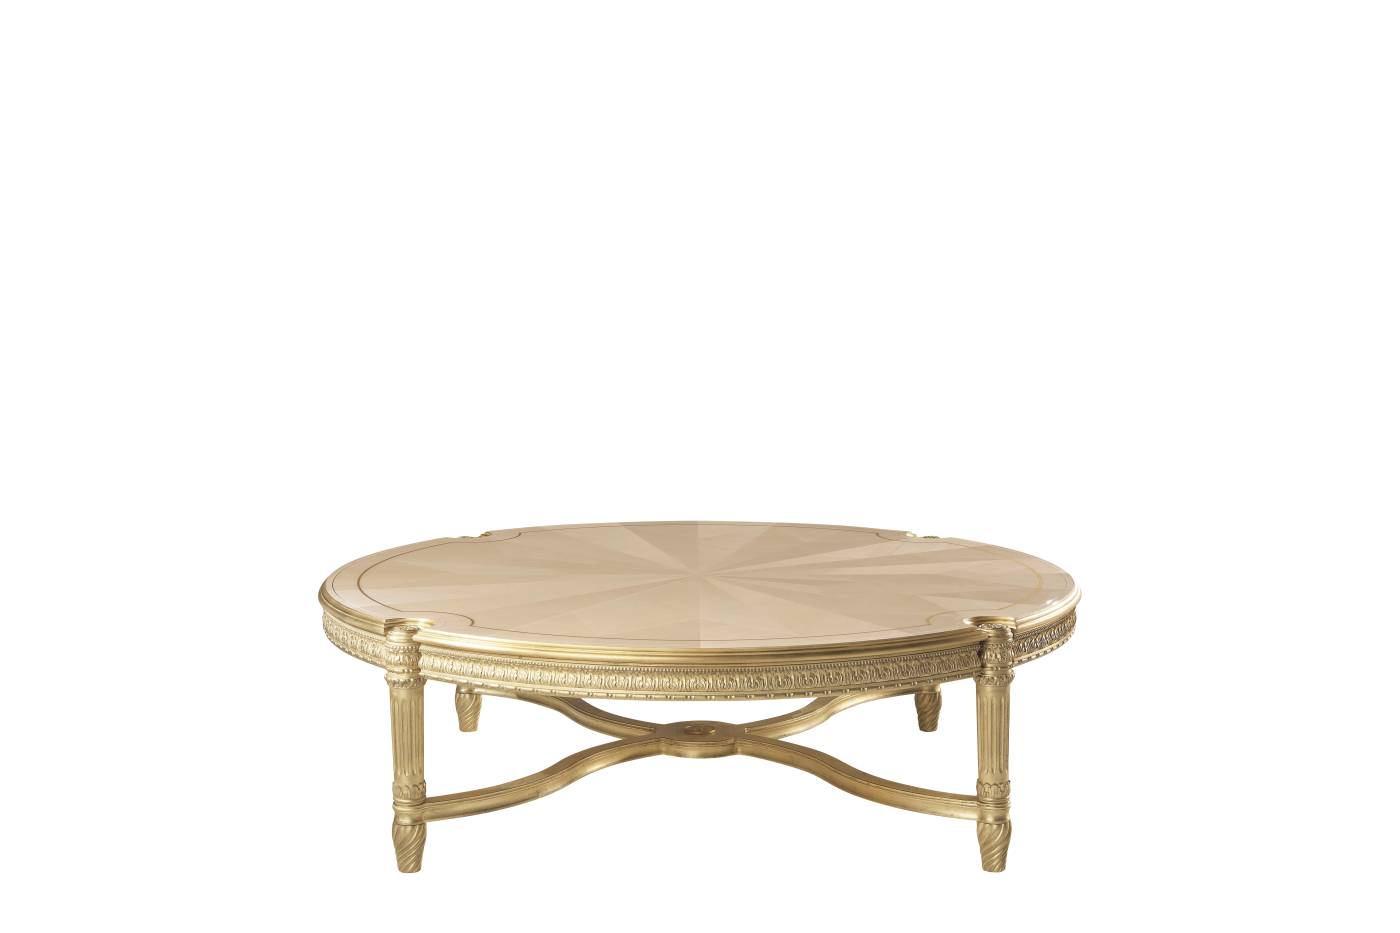 BOULEVARD low table – Jumbo Collection Italian luxury classic low tables. tailor-made interior design projects to meet all your furnishing needs